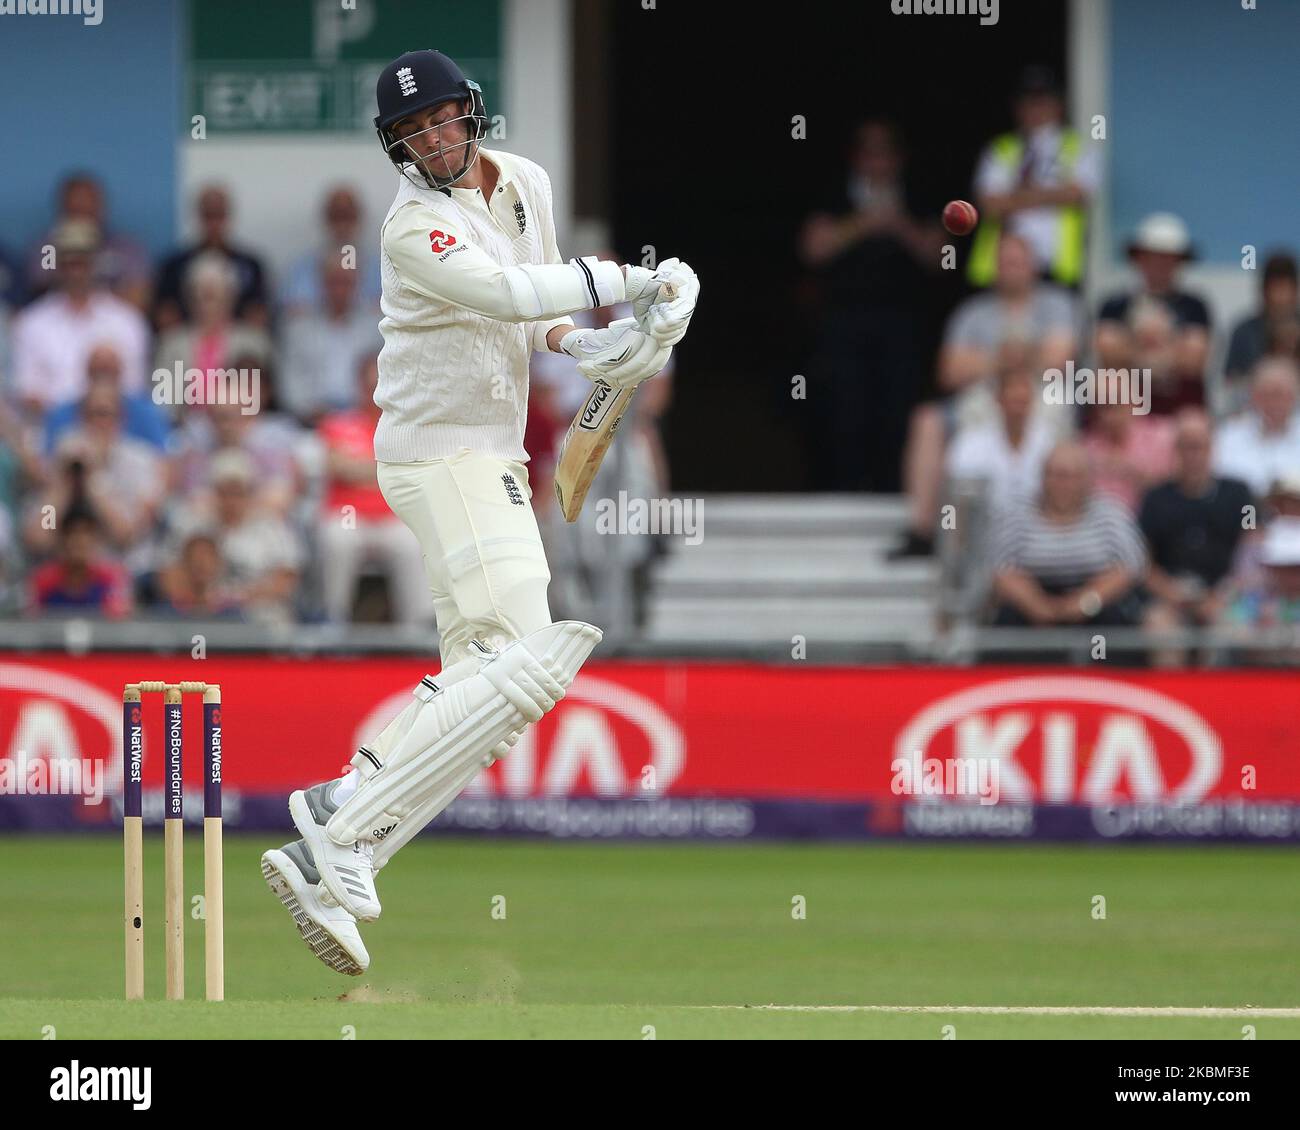 Stuart Broad of England avoids a short pitched delivery during the third day of the Second Nat West Test match between England and Pakistan at Headingley Cricket Ground, Leeds on Sunday 3rd June 2018. (Photo by Mark Fletcher/MI News/NurPhoto) Stock Photo